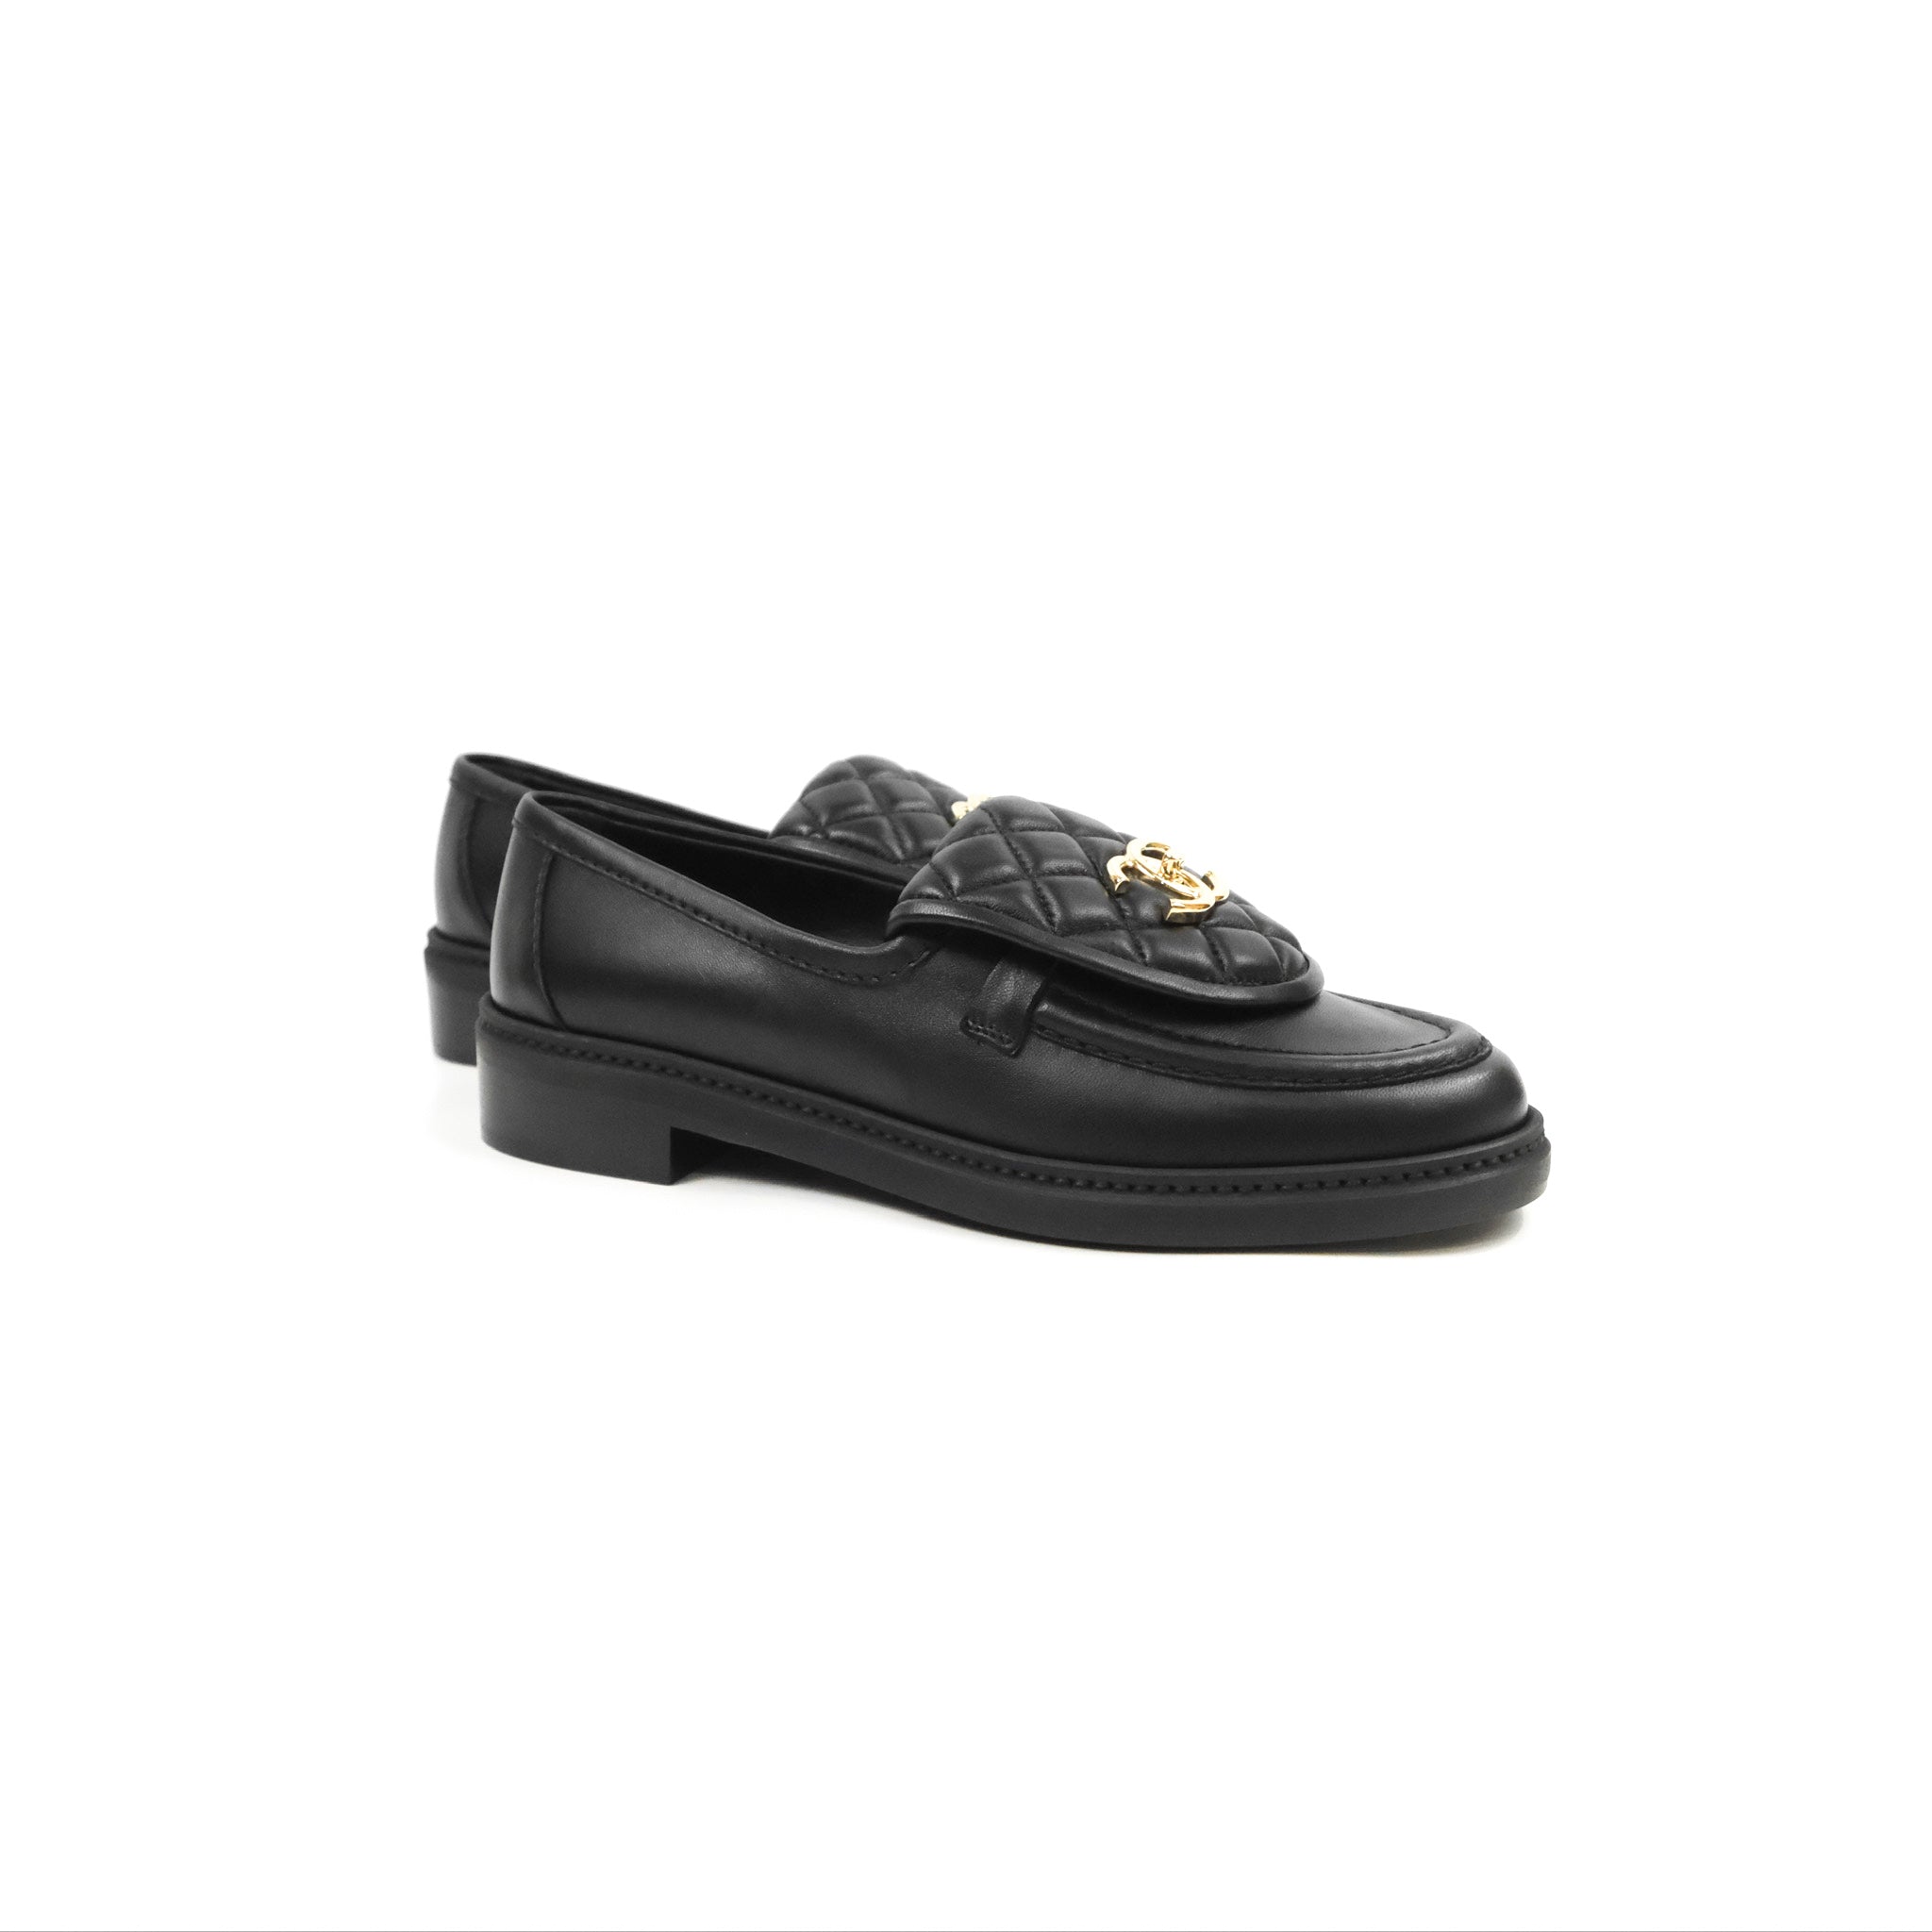 AUTHENTIC CHANEL CLASSIC CC Logo Black Leather Turnlock Loafers sz 38 Flap  $599.00 - PicClick